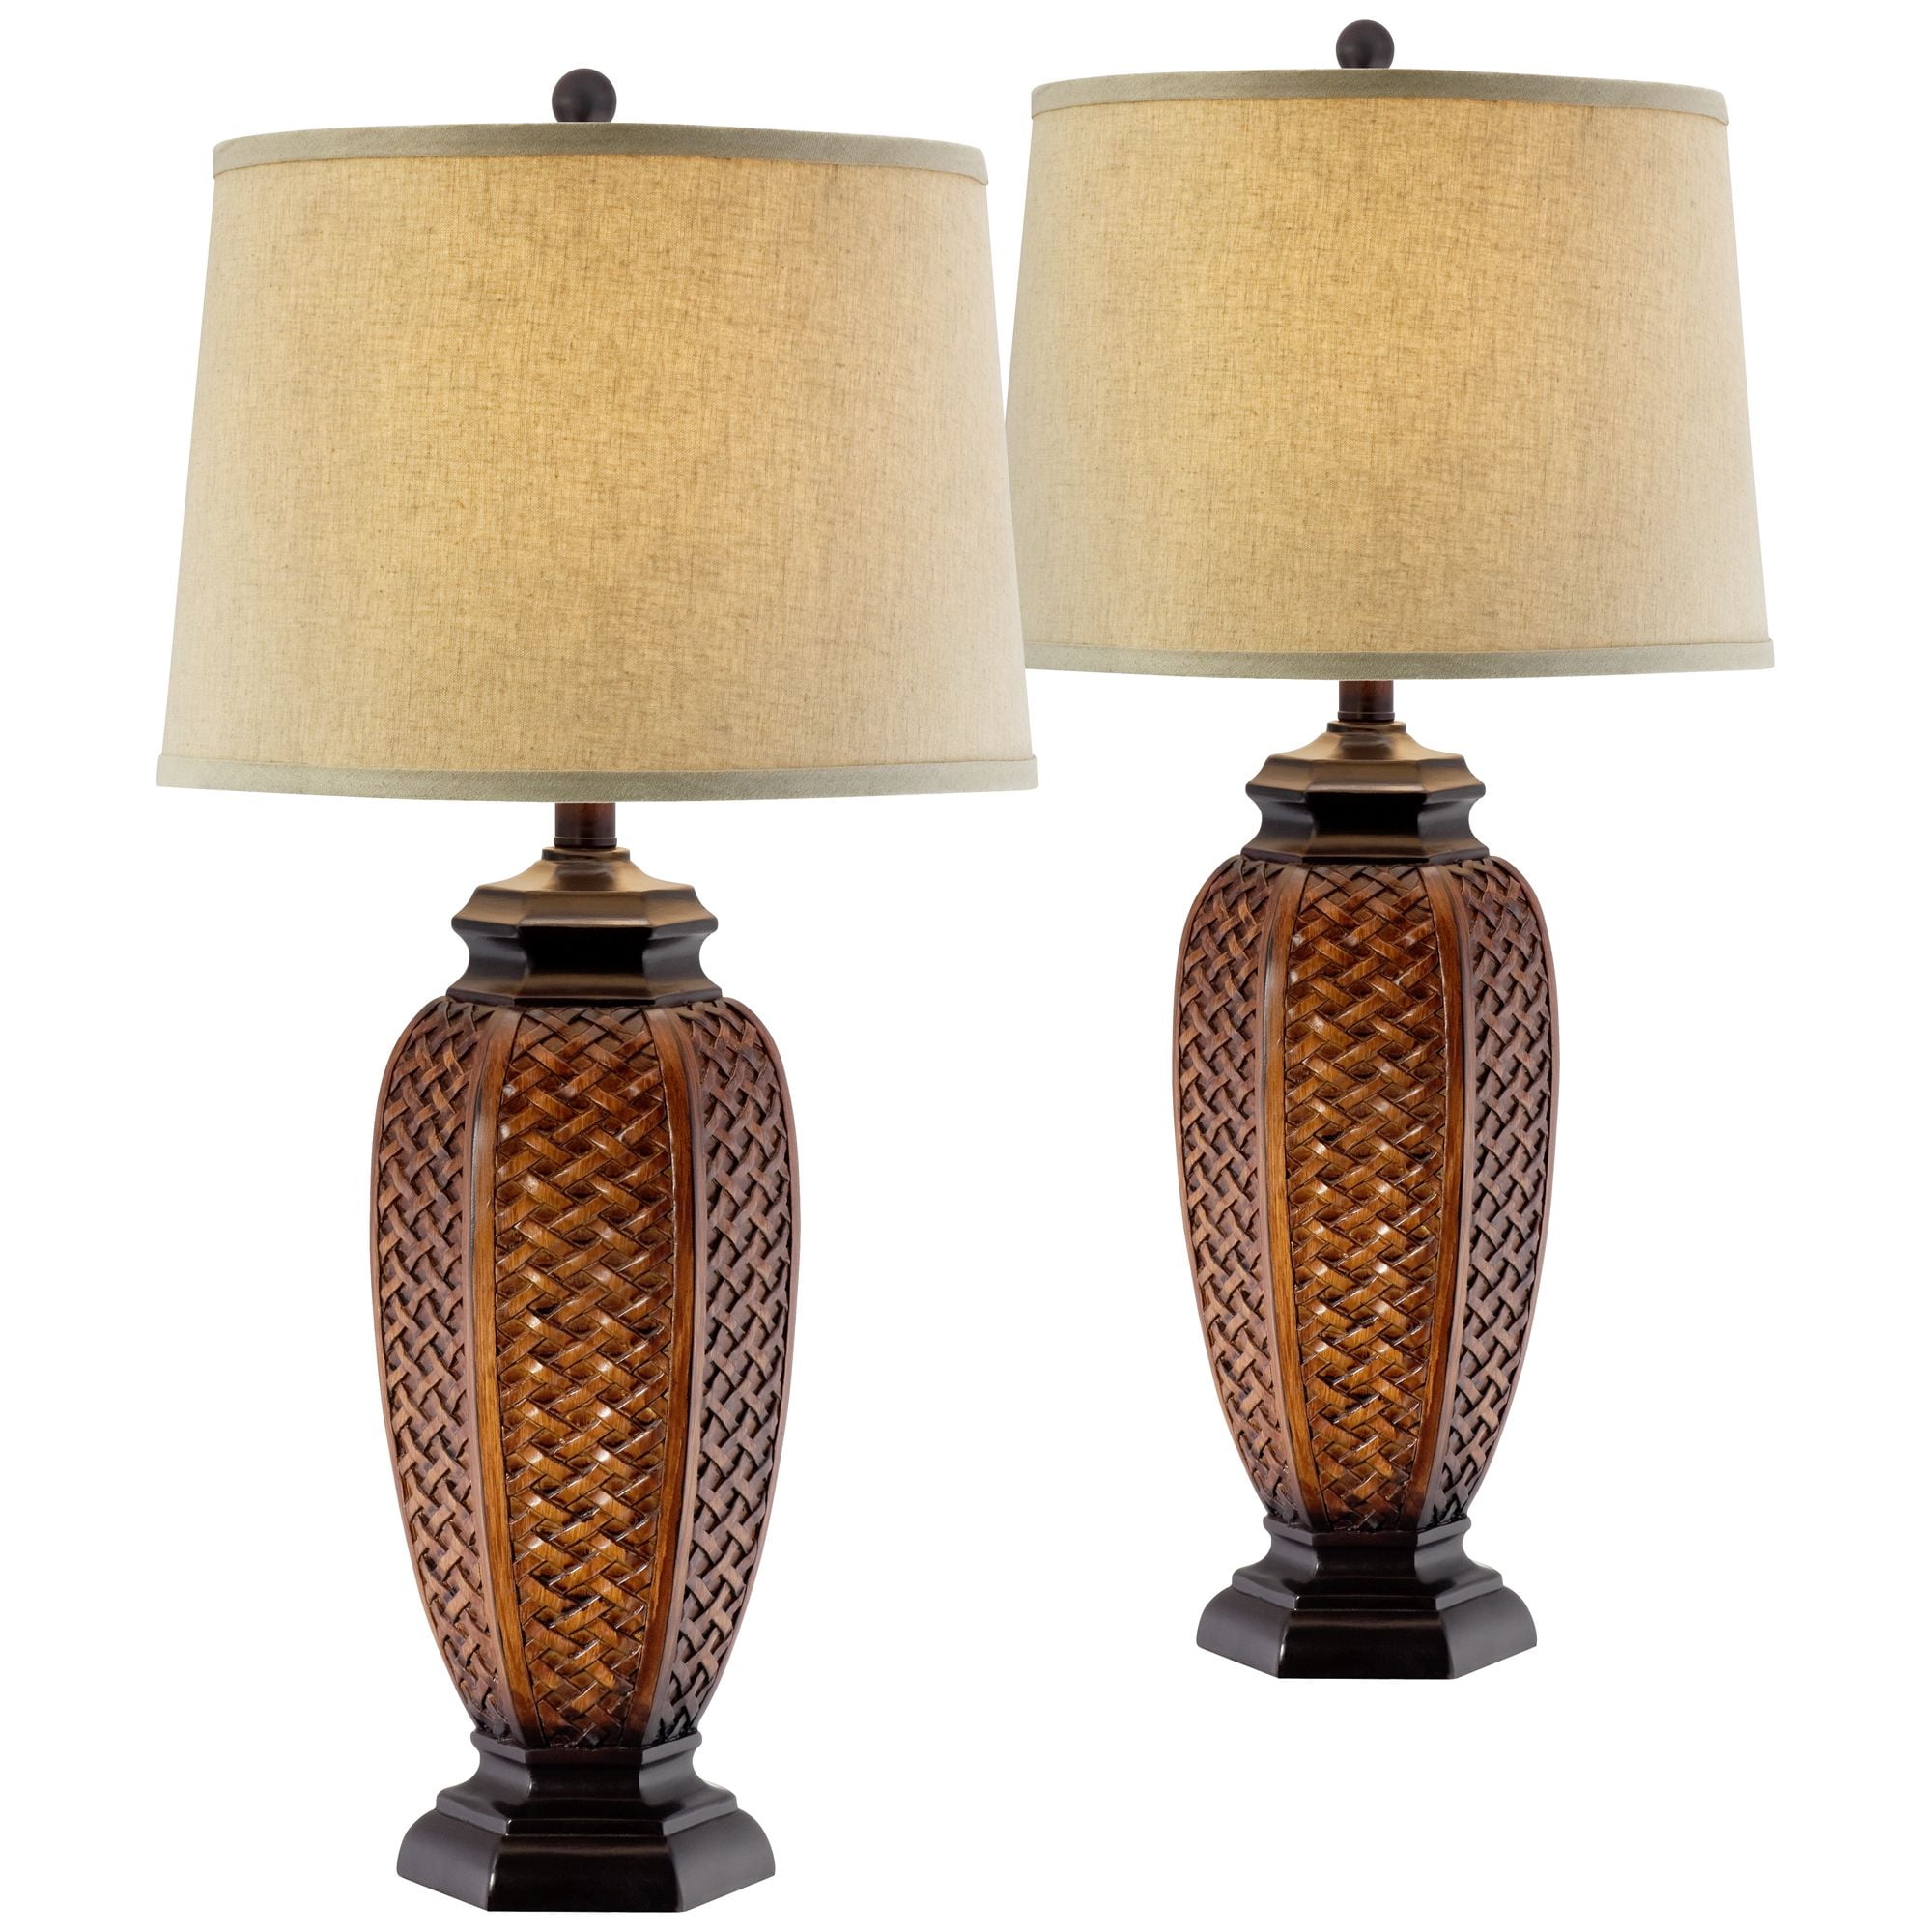 Franklin Iron Works Modern Rustic Table, Distressed Table Lamps Set Of 2